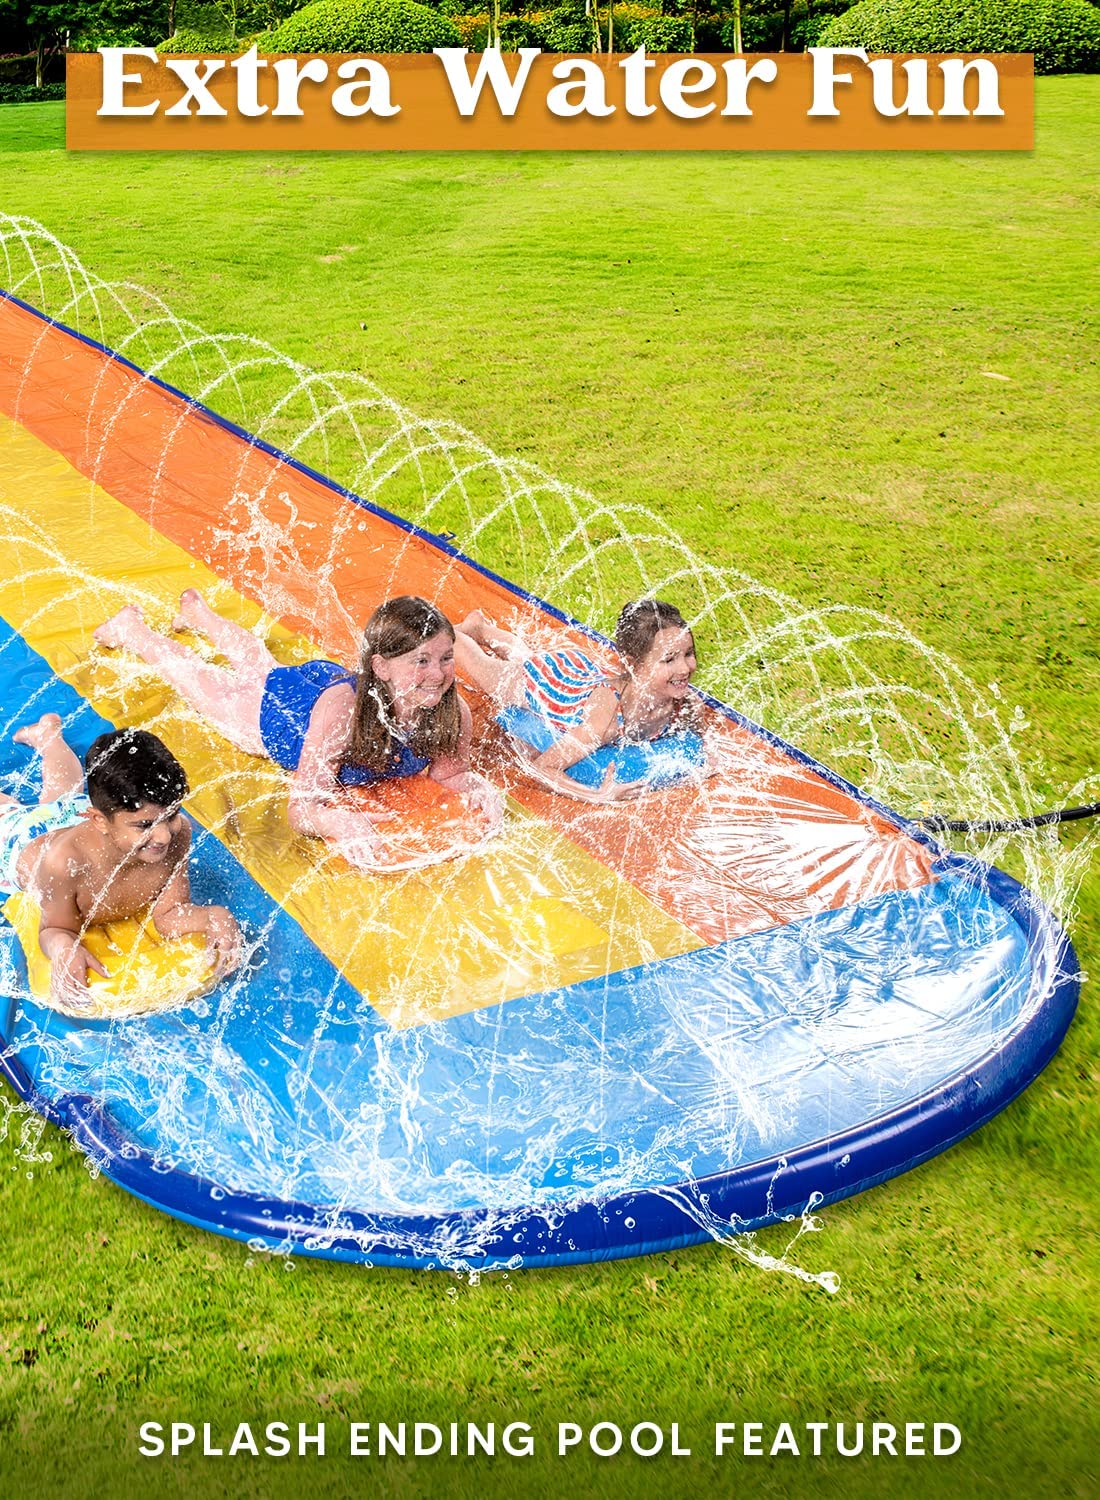 18ft/22.5ft Triple Lanes Water Slide and 3 Boogie Boards